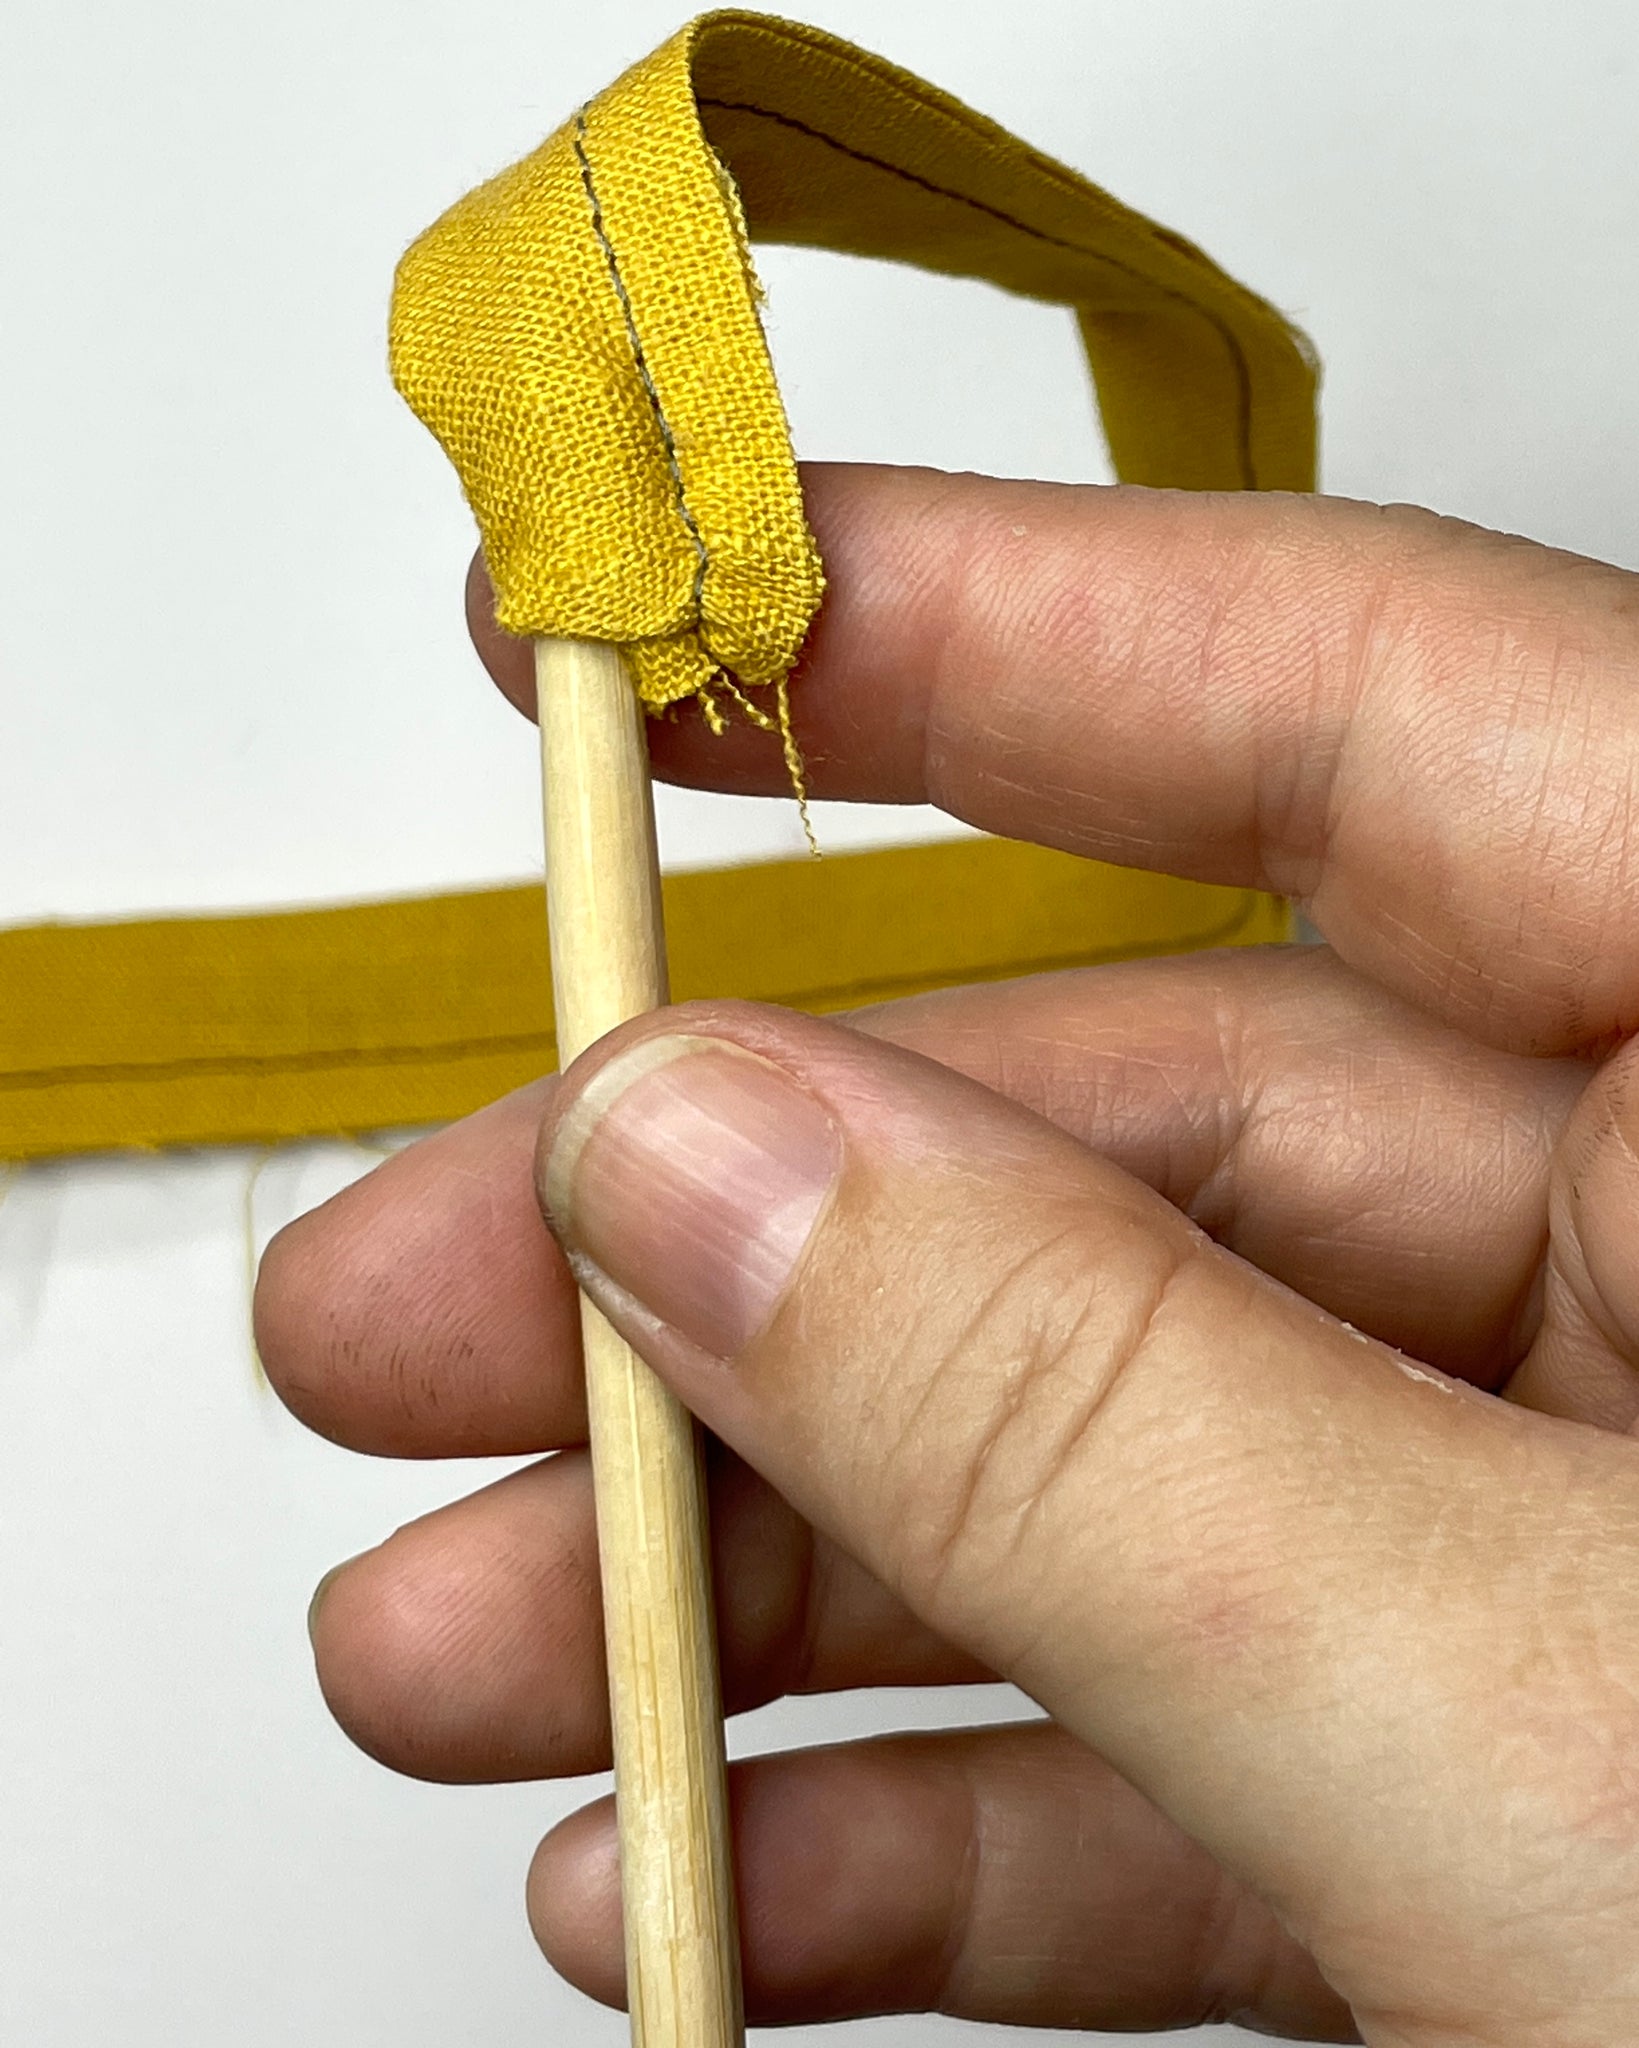 Turning the yellow waist tie right side out.